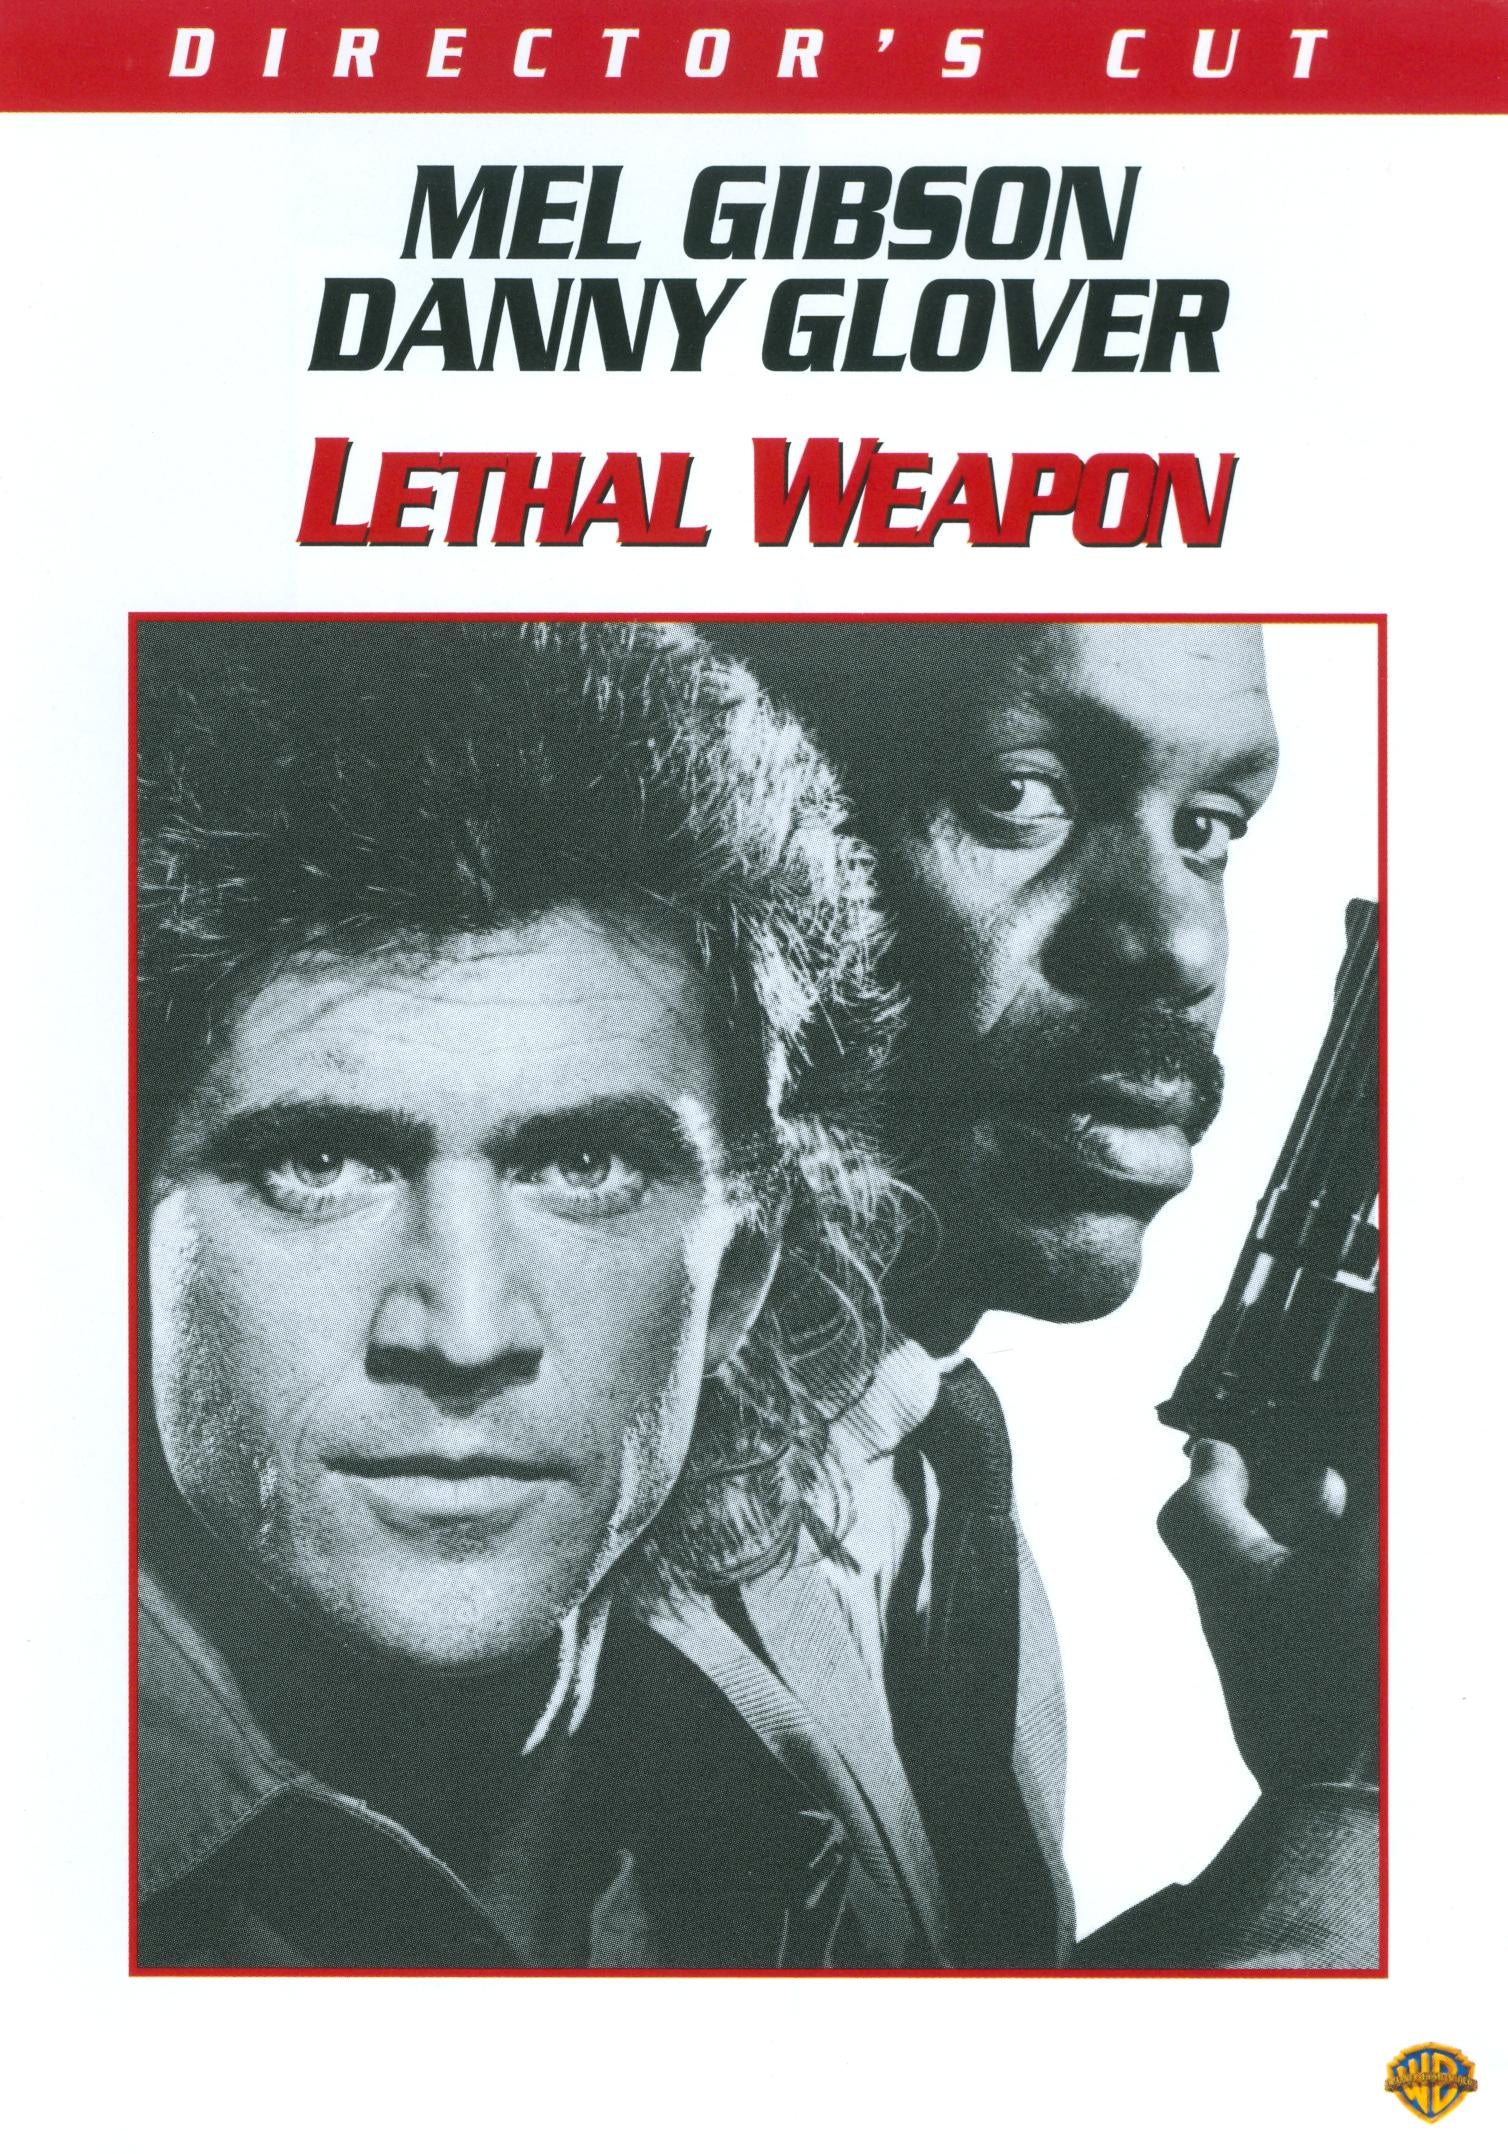 Lethal Weapon [Director's Cut] cover art